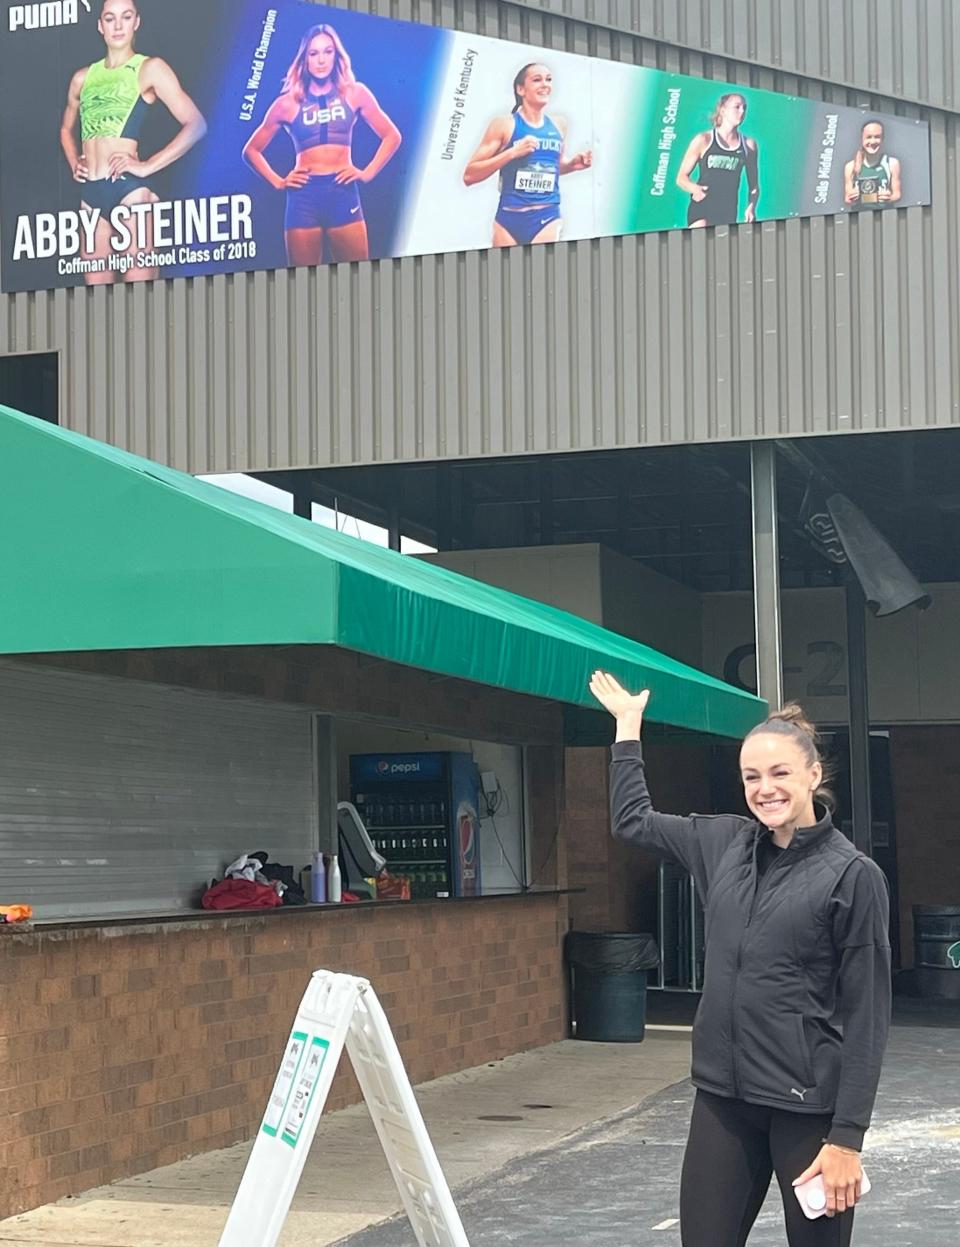 Dublin Coffman graduate Abby Steiner points out the mural that was unveiled Saturday at the school to commemorate her running career.